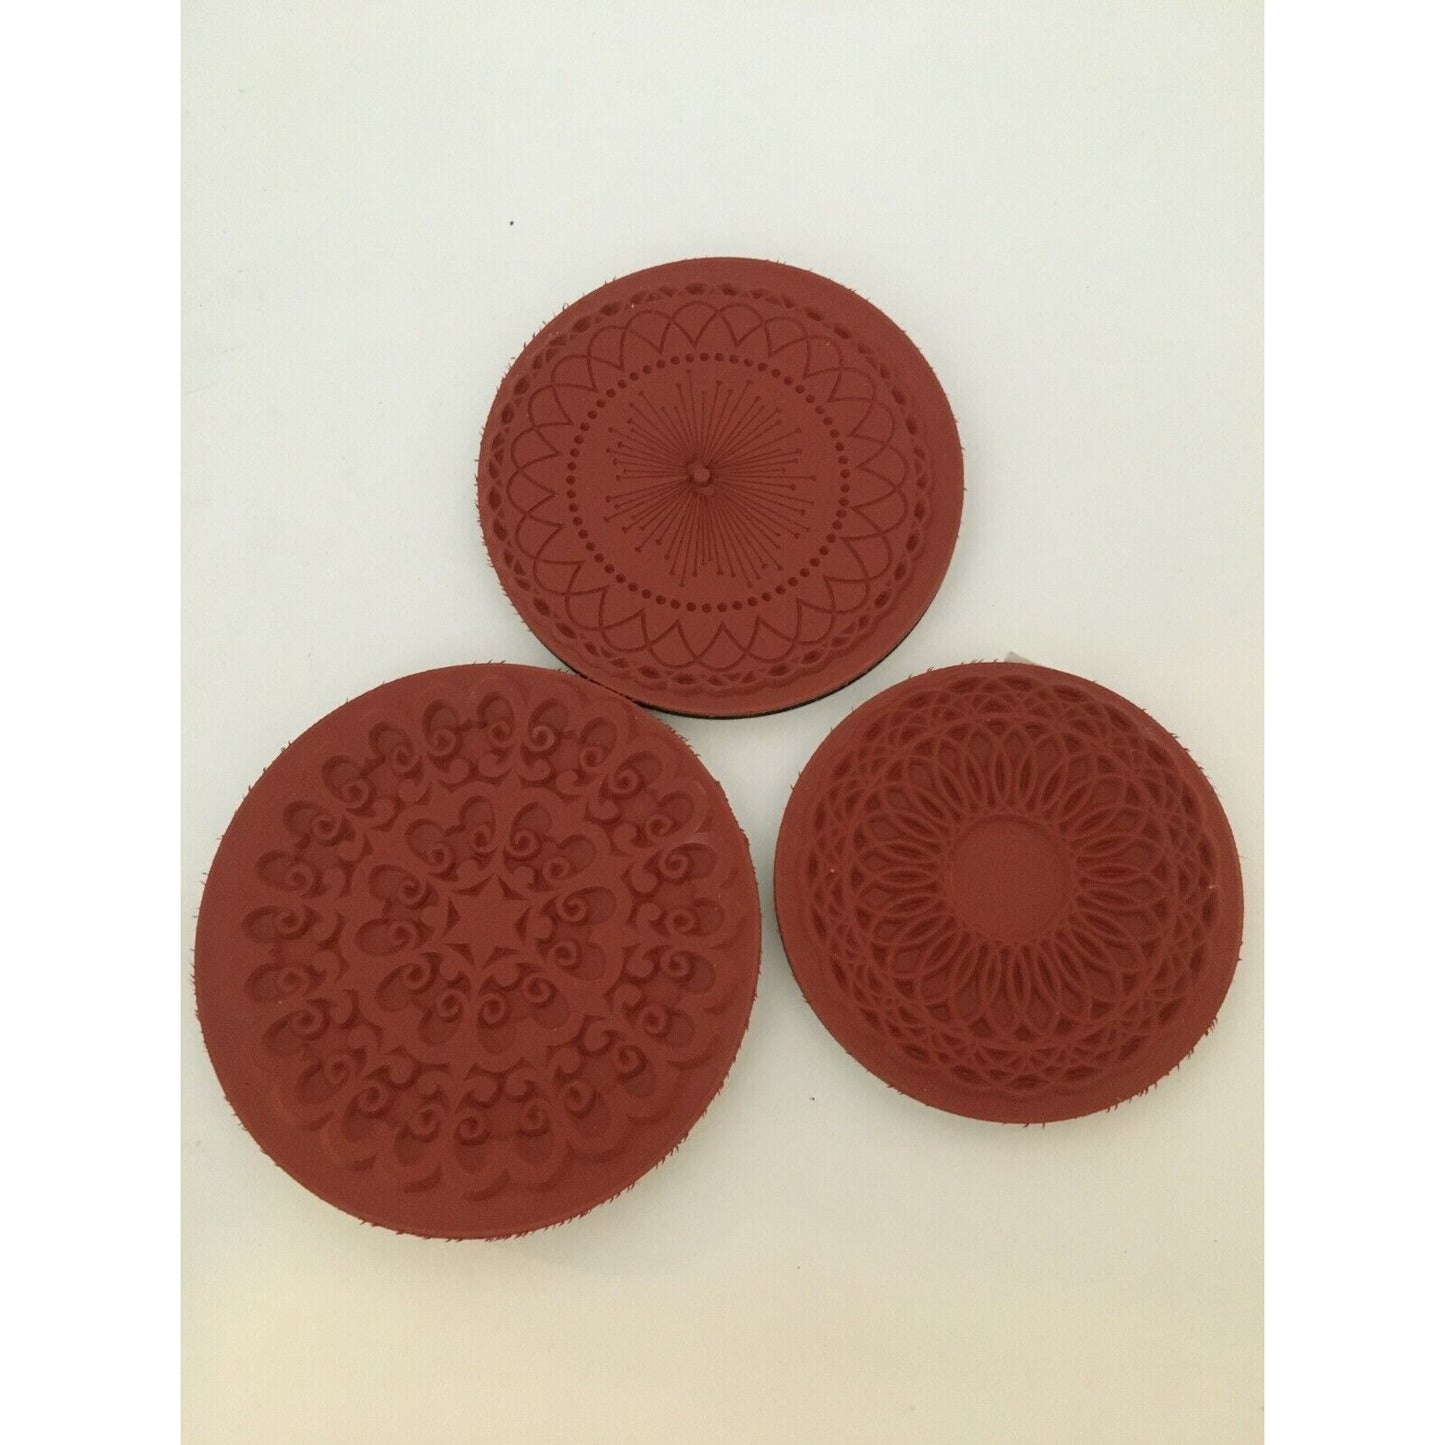 Unity Stamp Company Bella Doilies Red Rubber Repositionable Stamps Unmounted New